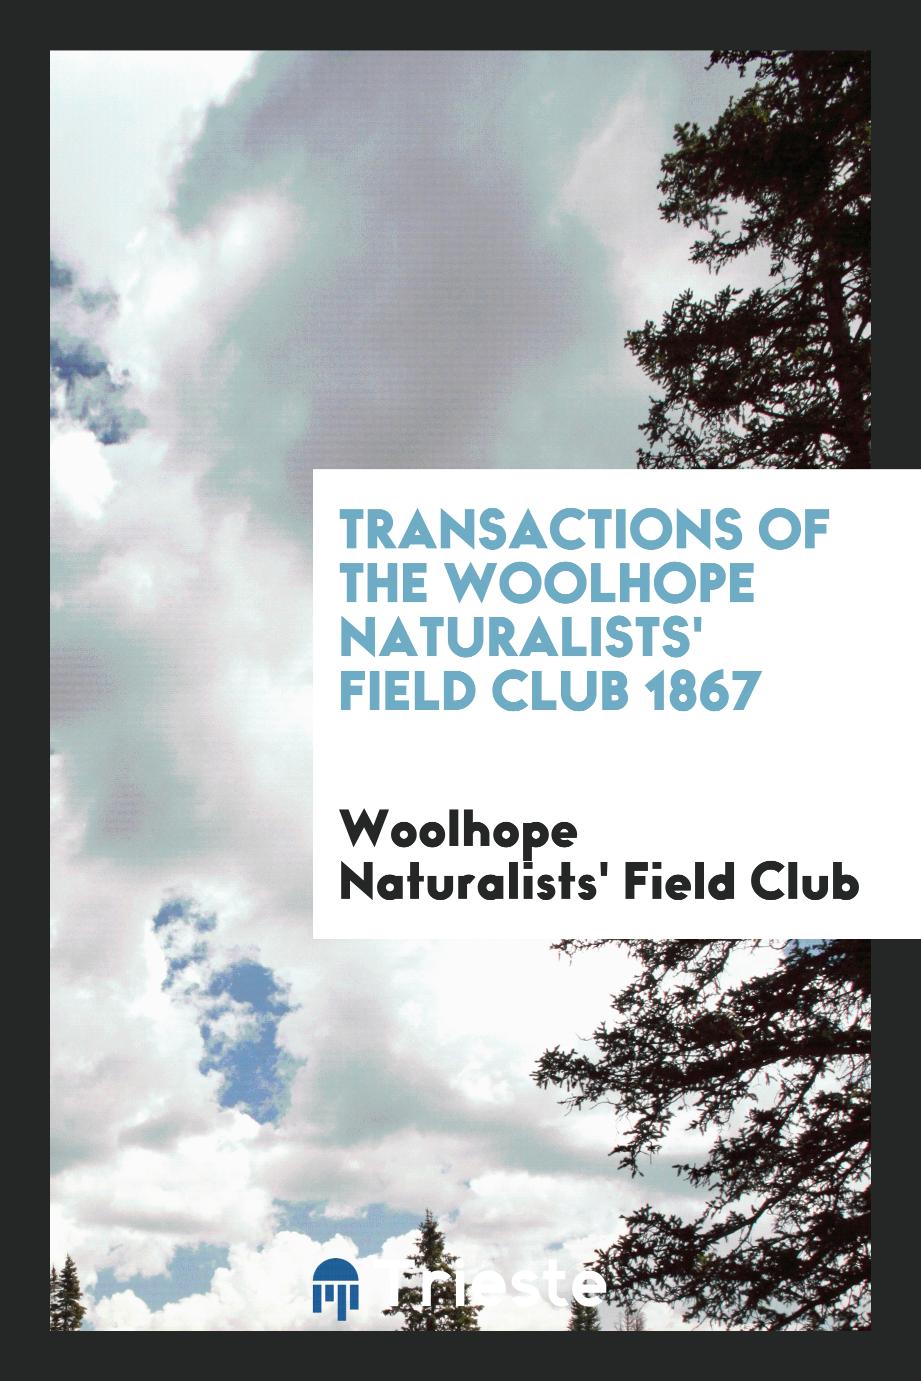 Transactions of the Woolhope Naturalists' Field Club 1867